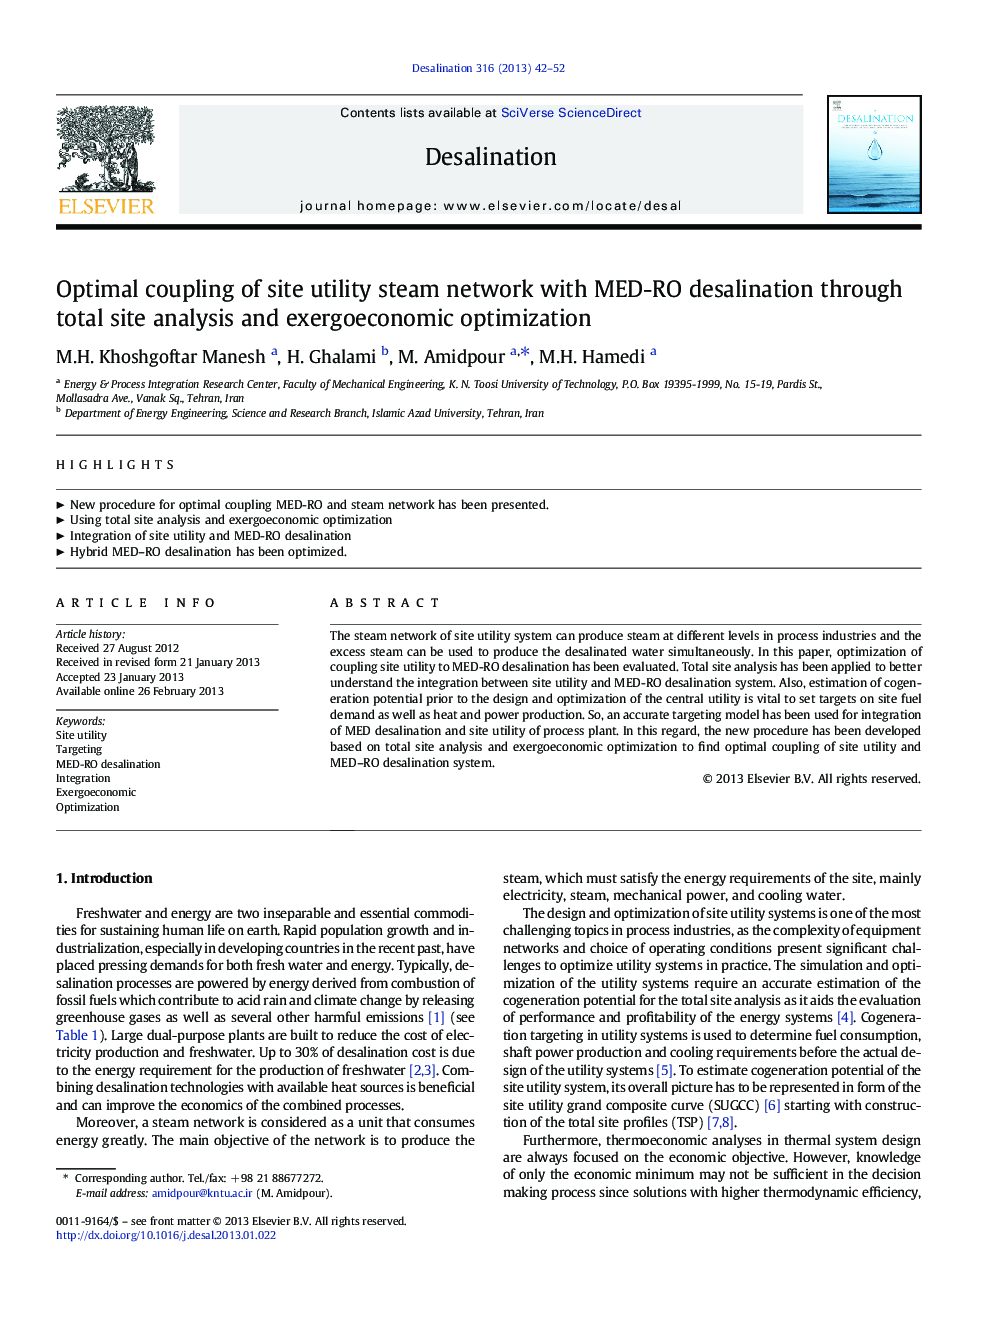 Optimal coupling of site utility steam network with MED-RO desalination through total site analysis and exergoeconomic optimization